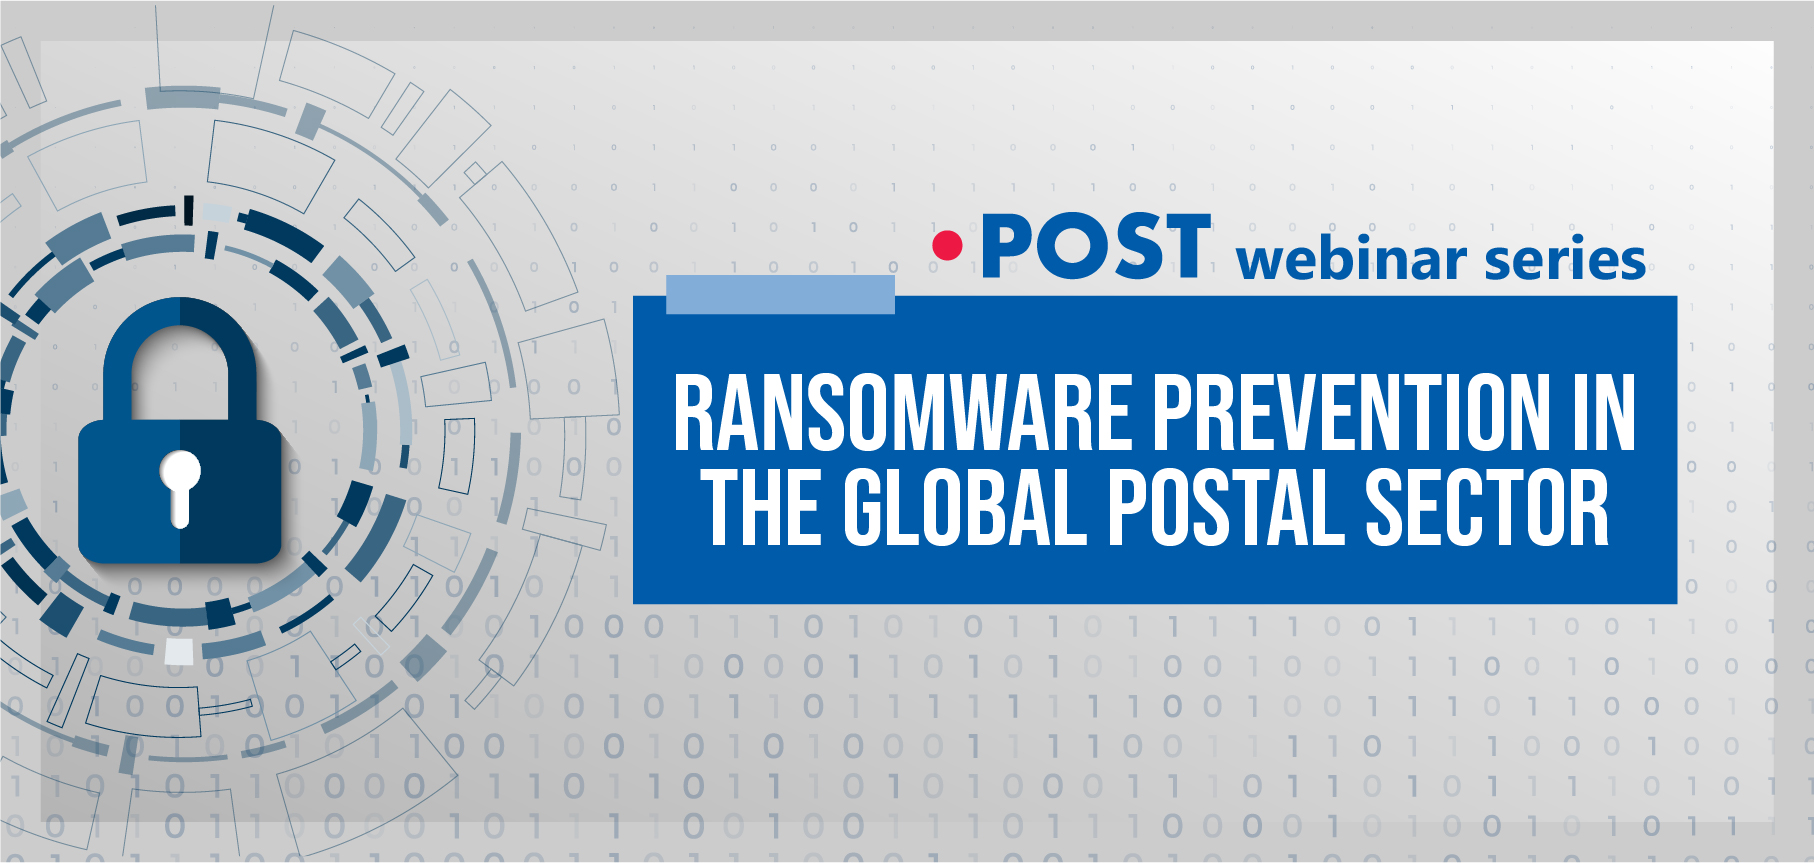 Ransomware prevention in the global postal sector